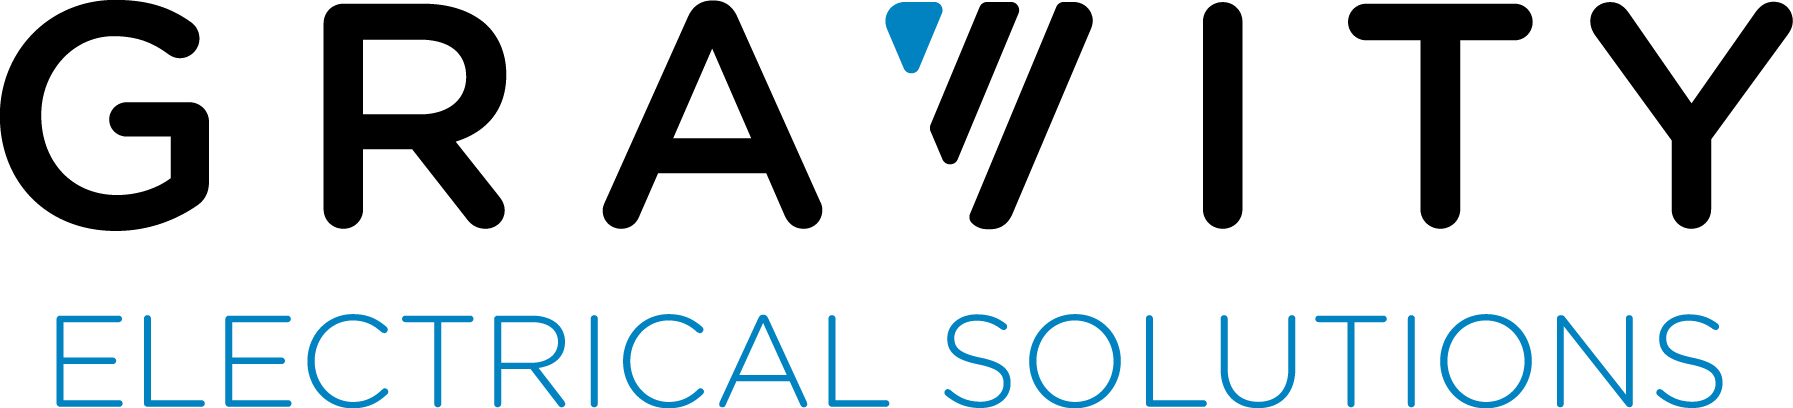 Gravity Electrical Solutions's logo